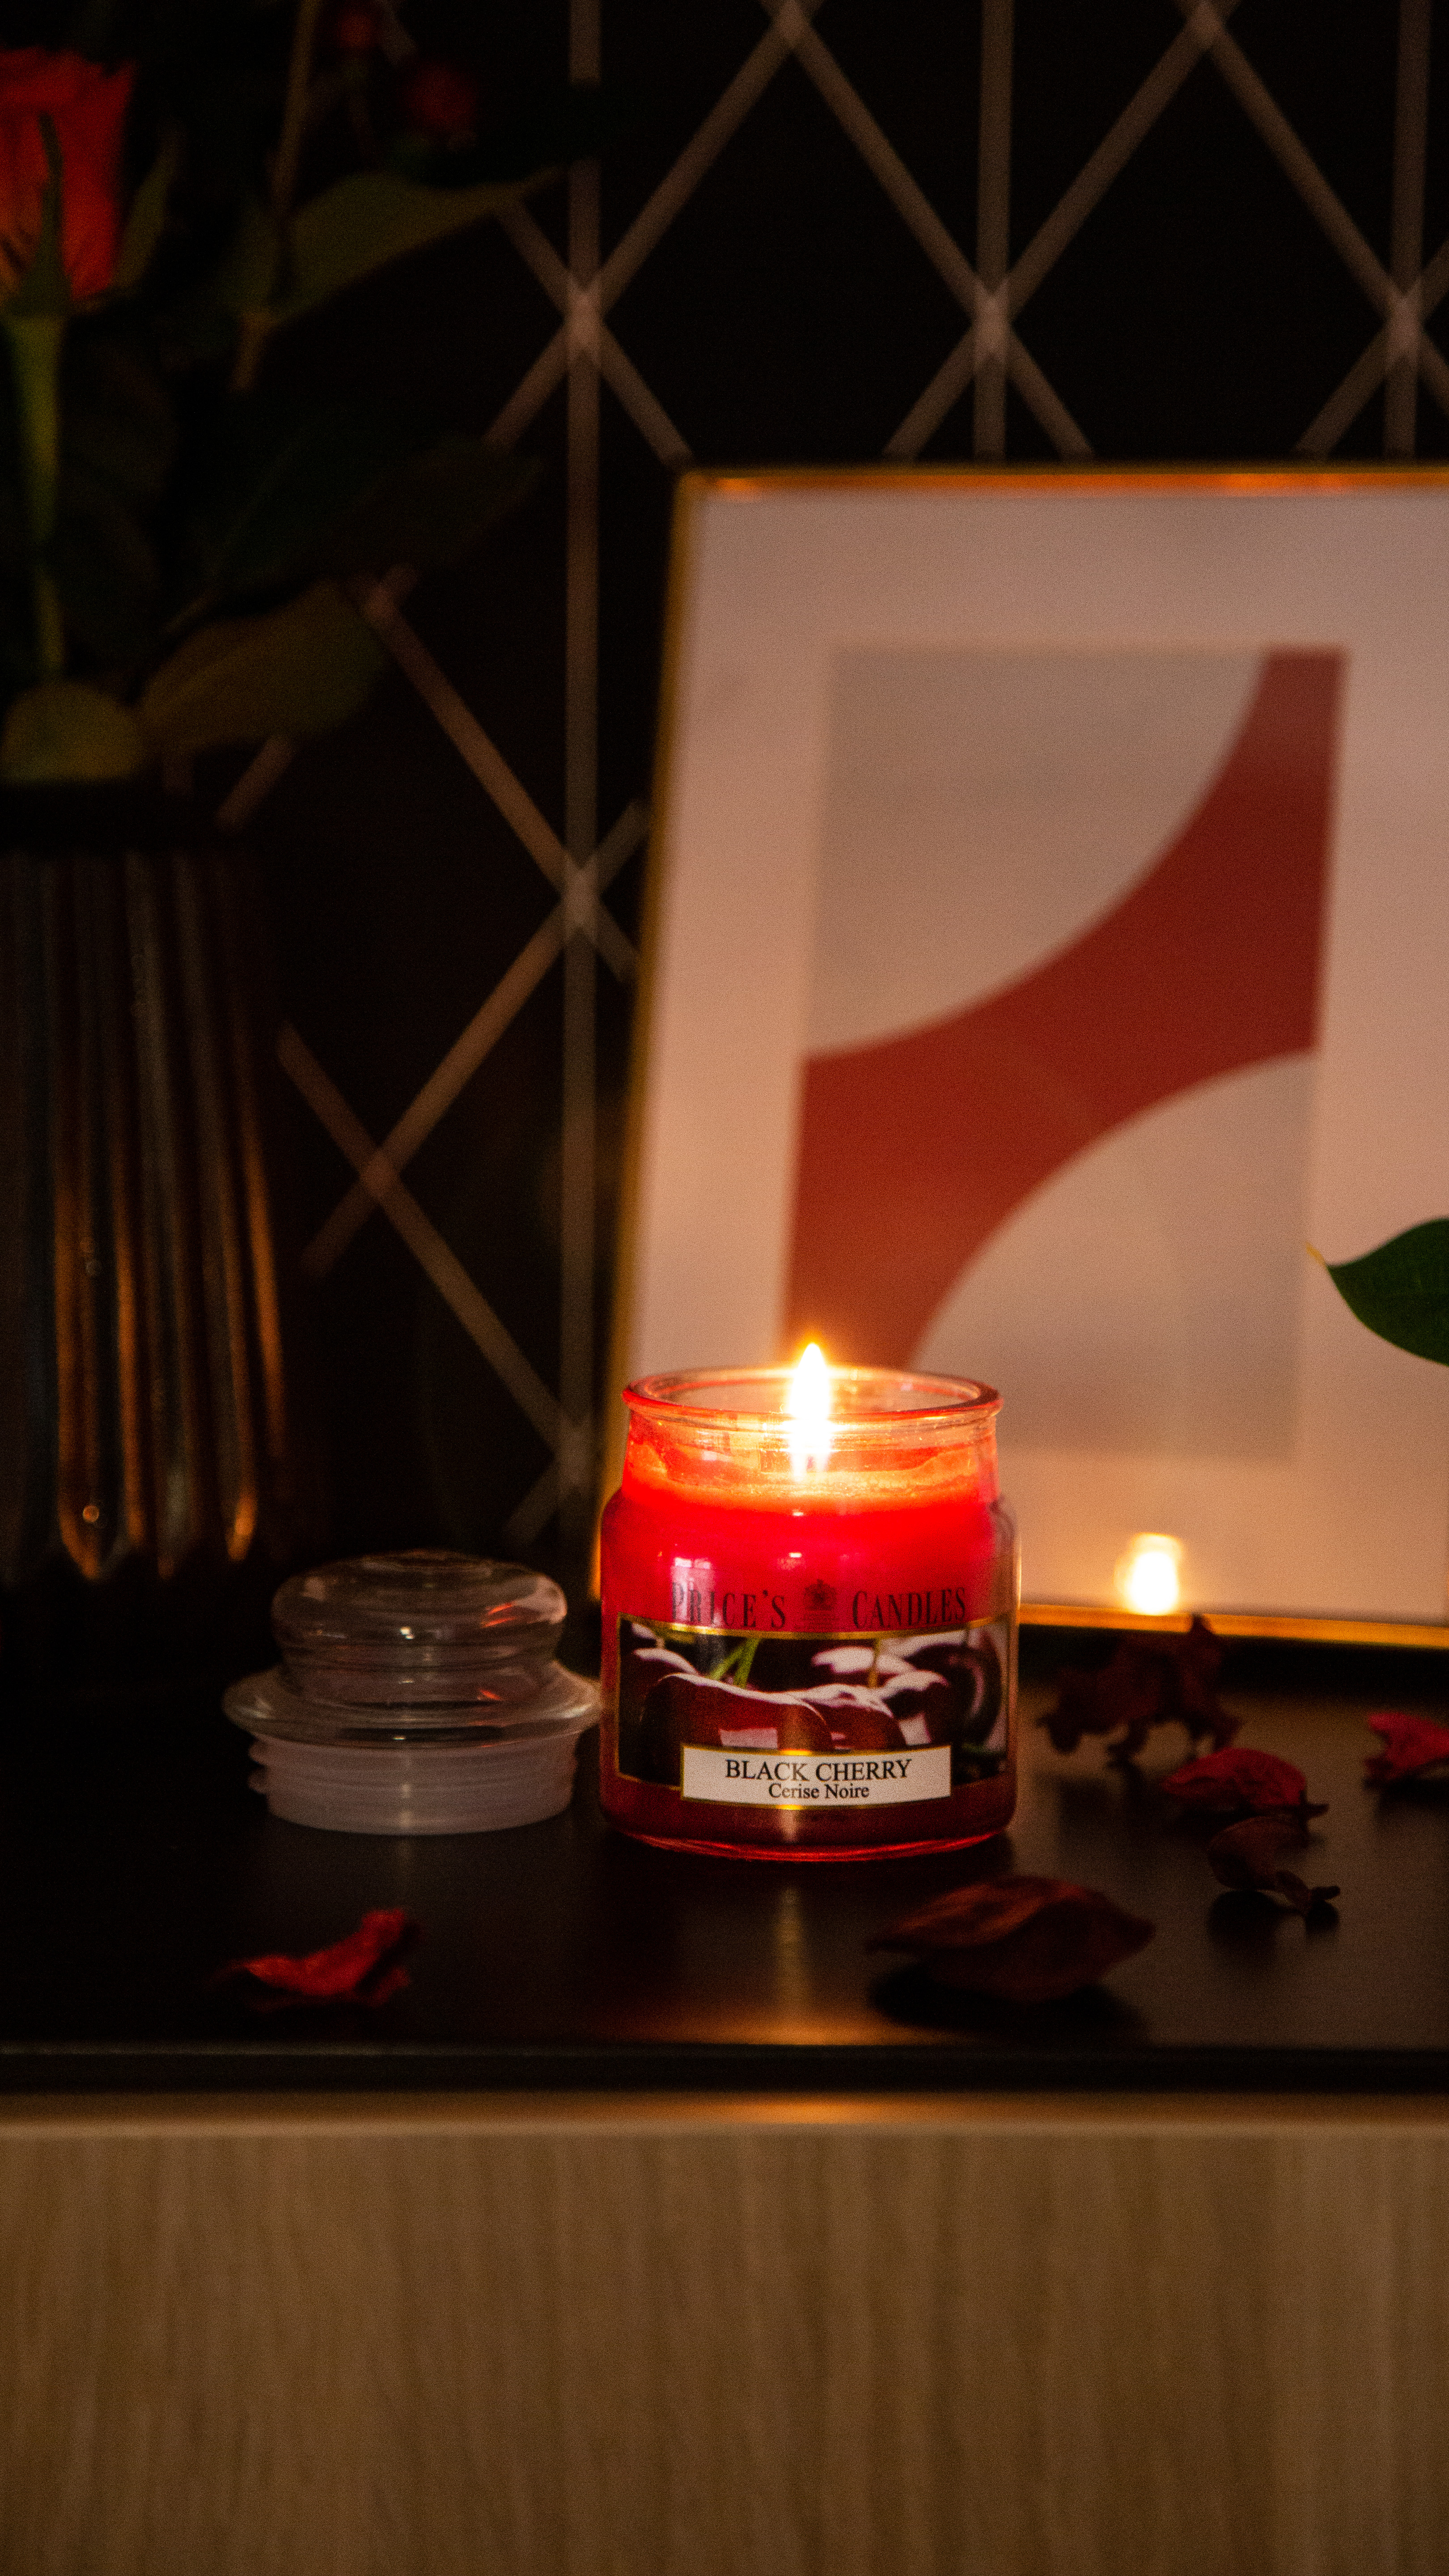 Prices Candle "Black Cherry" 100g 